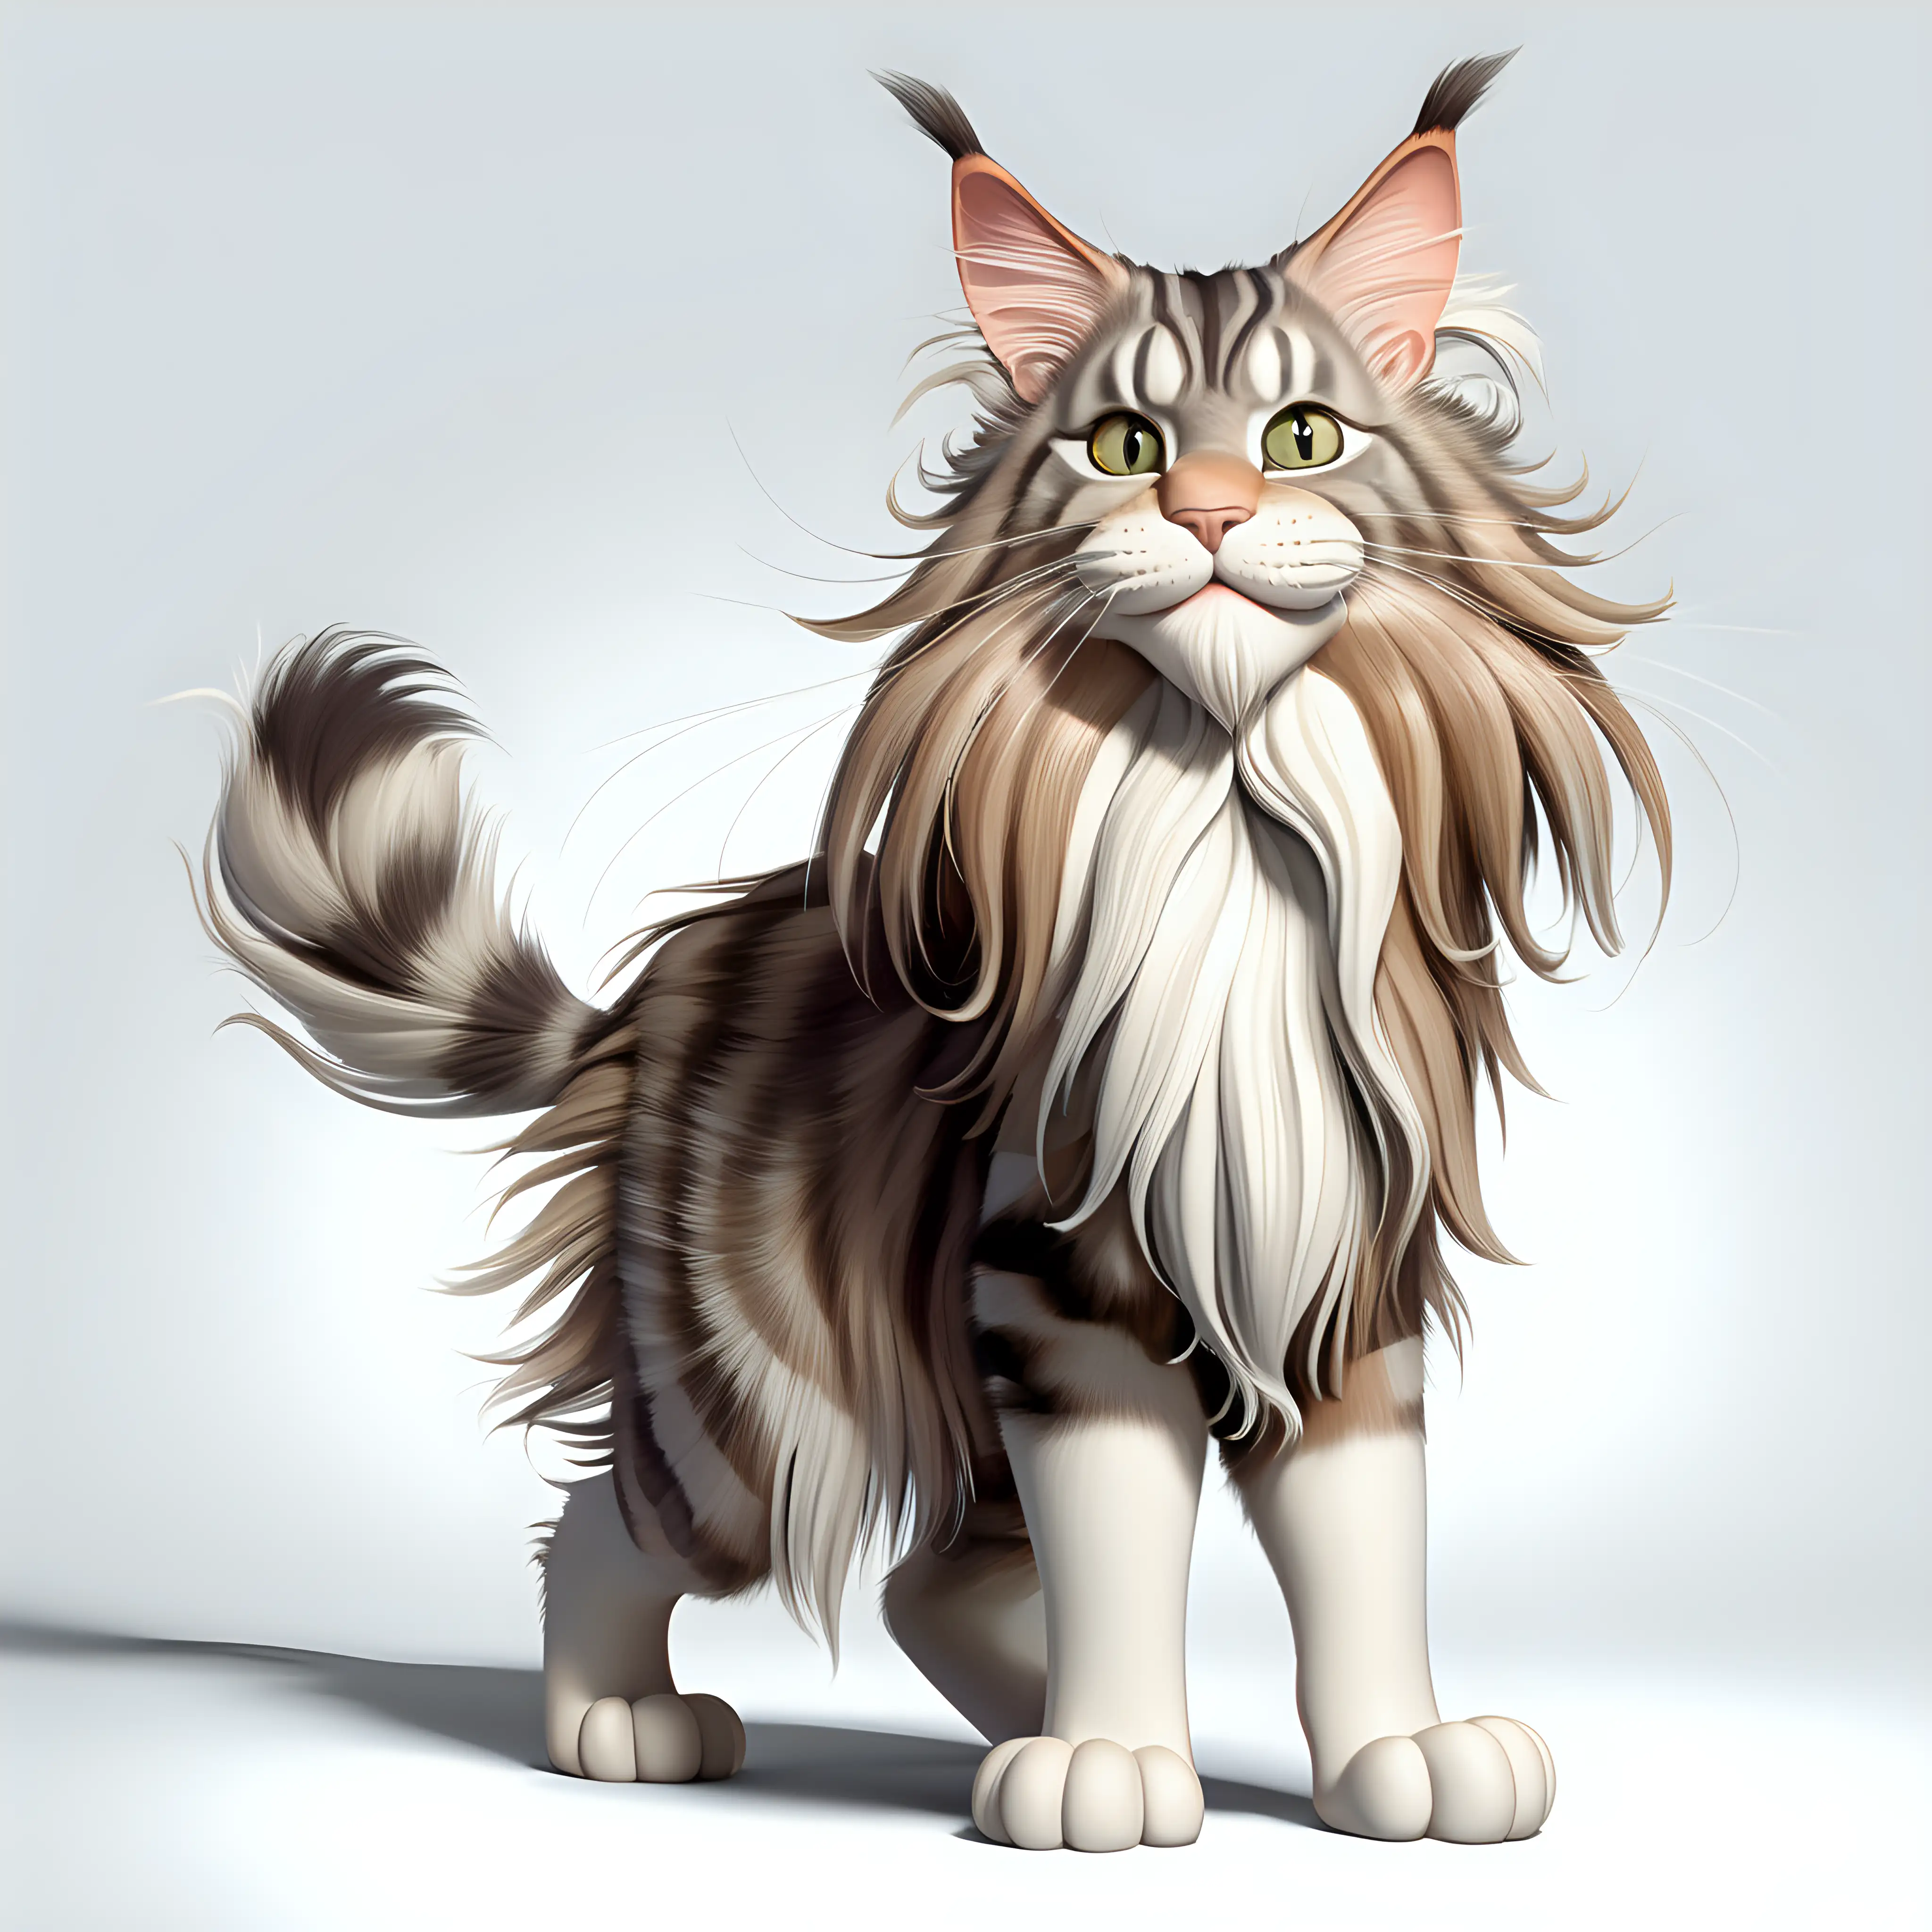 Exaggerated PixarStyle Maine Coon Cat Caricatures in FullLength